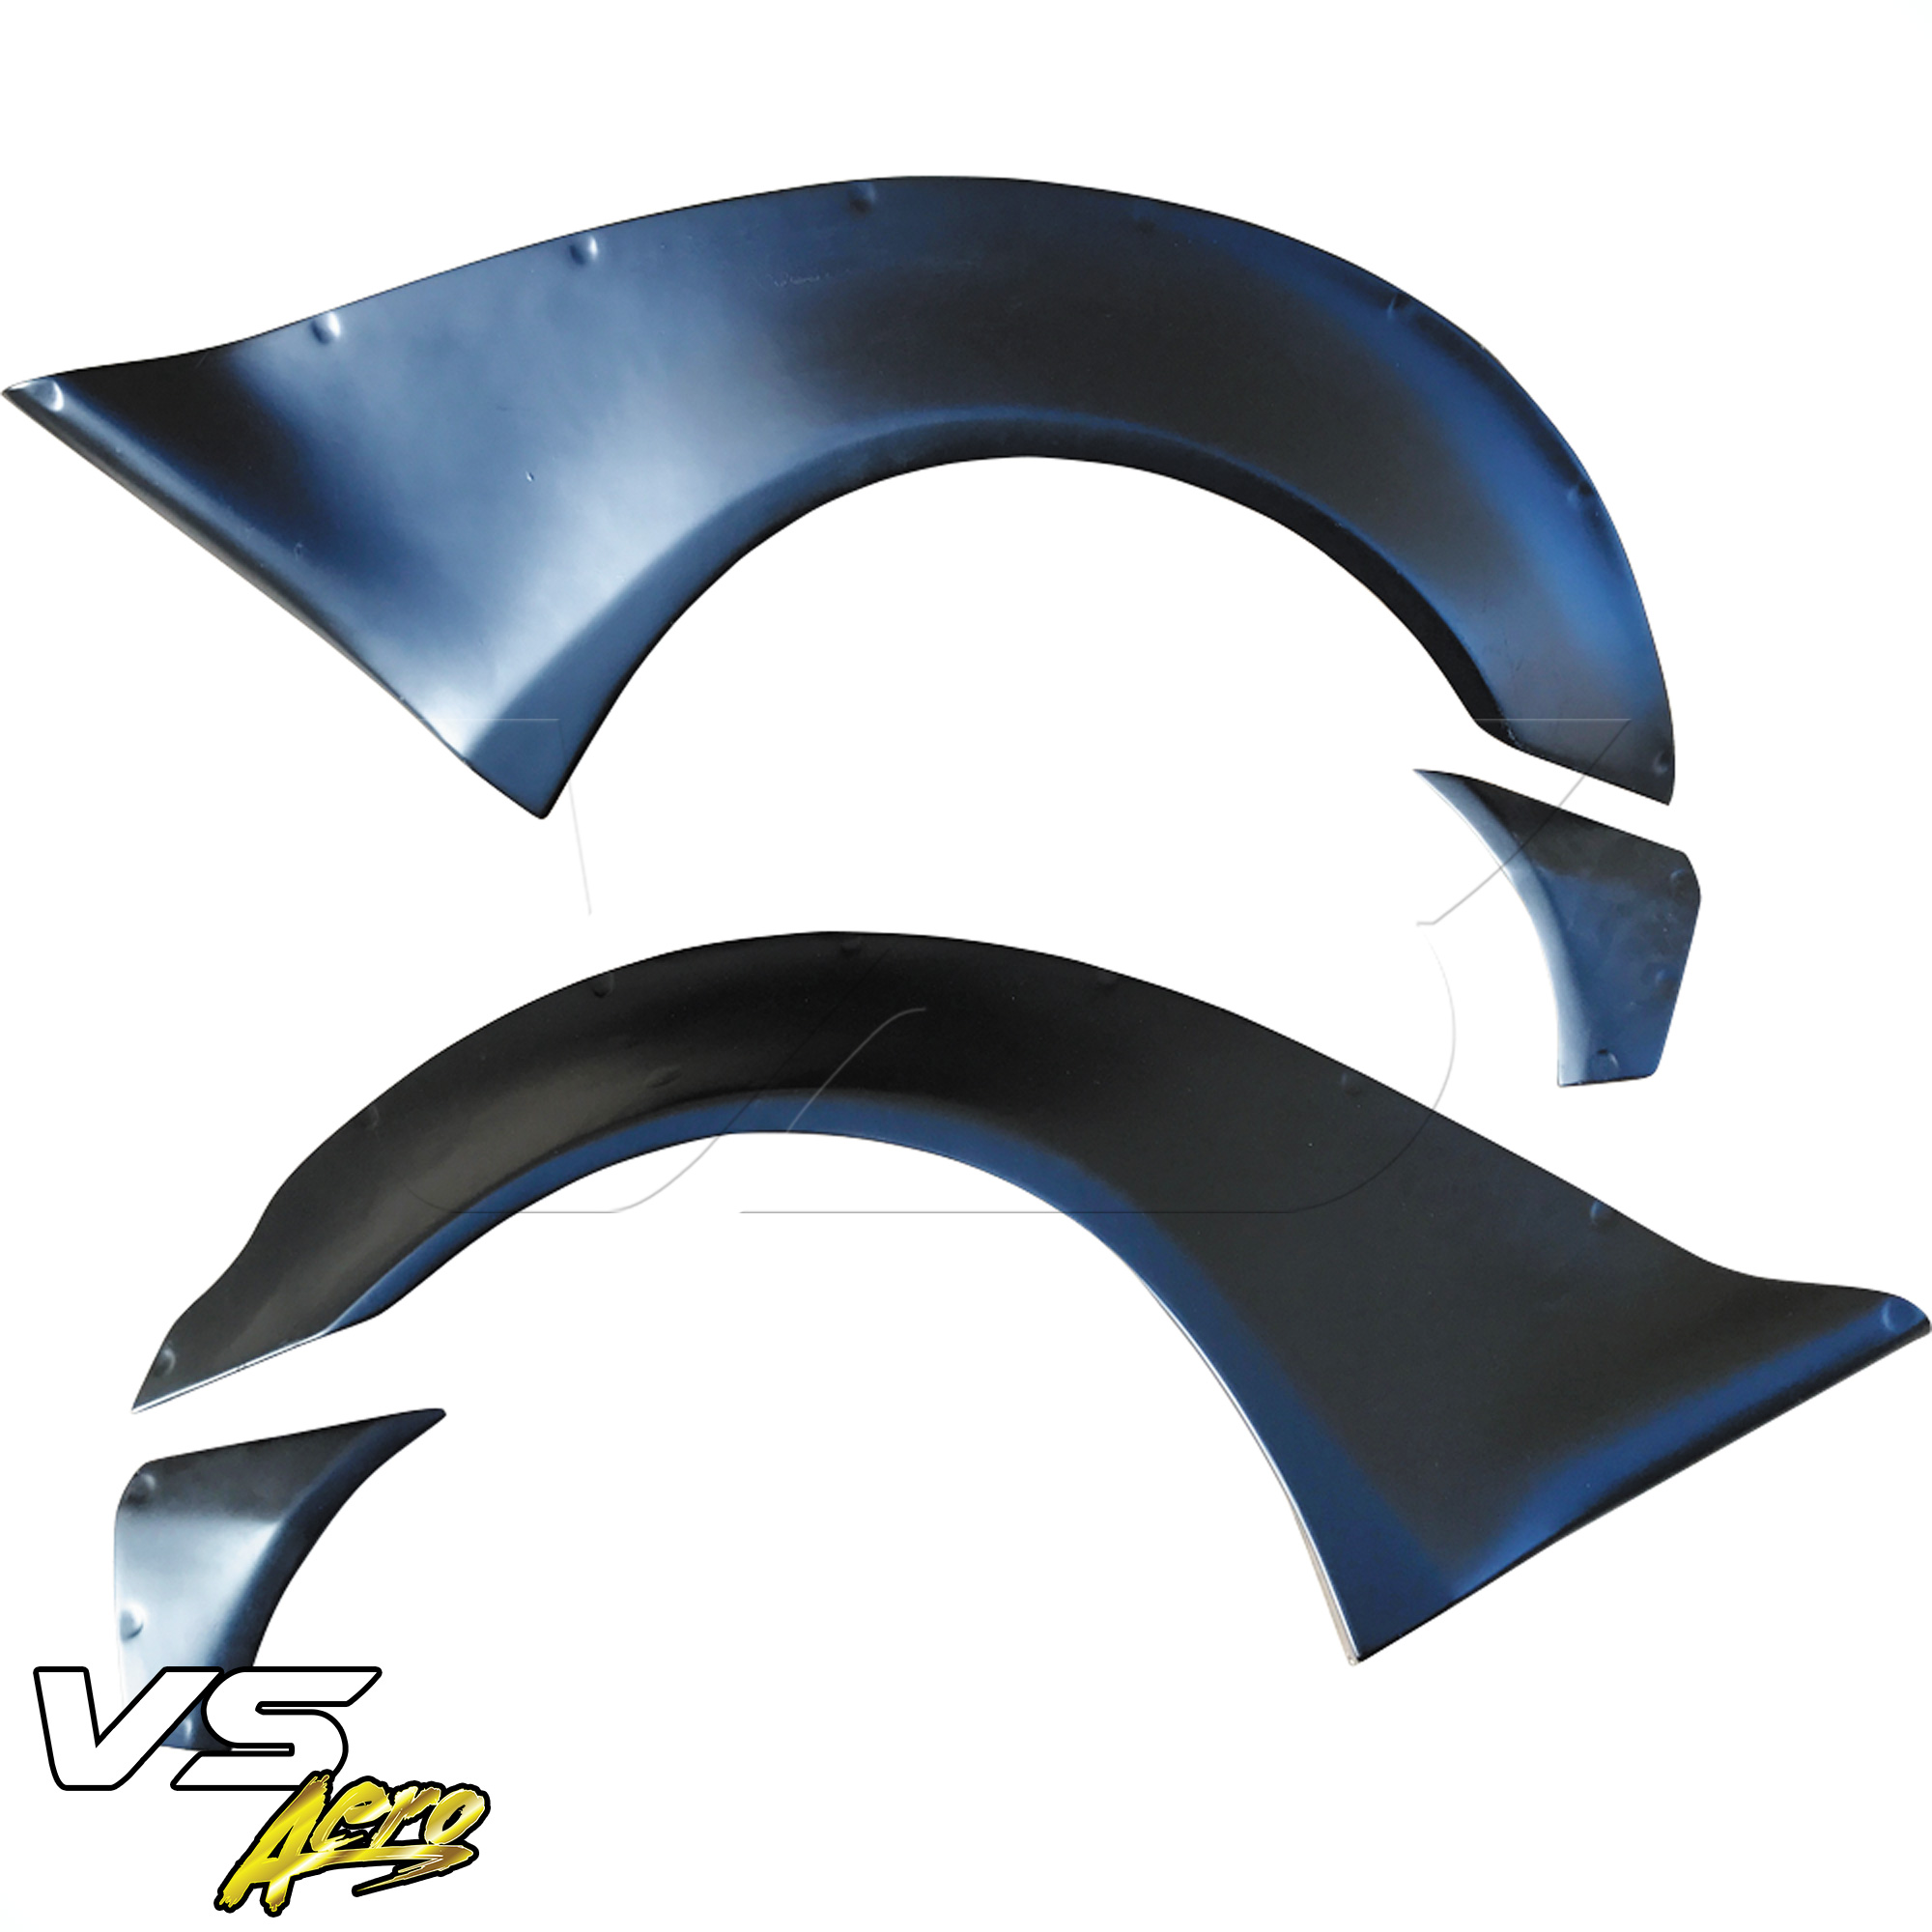 VSaero FRP LBPE Wide Body Fender Flares (rear) 4pc > Infiniti G37 Coupe 2008-2015 > 2dr Coupe - Image 7